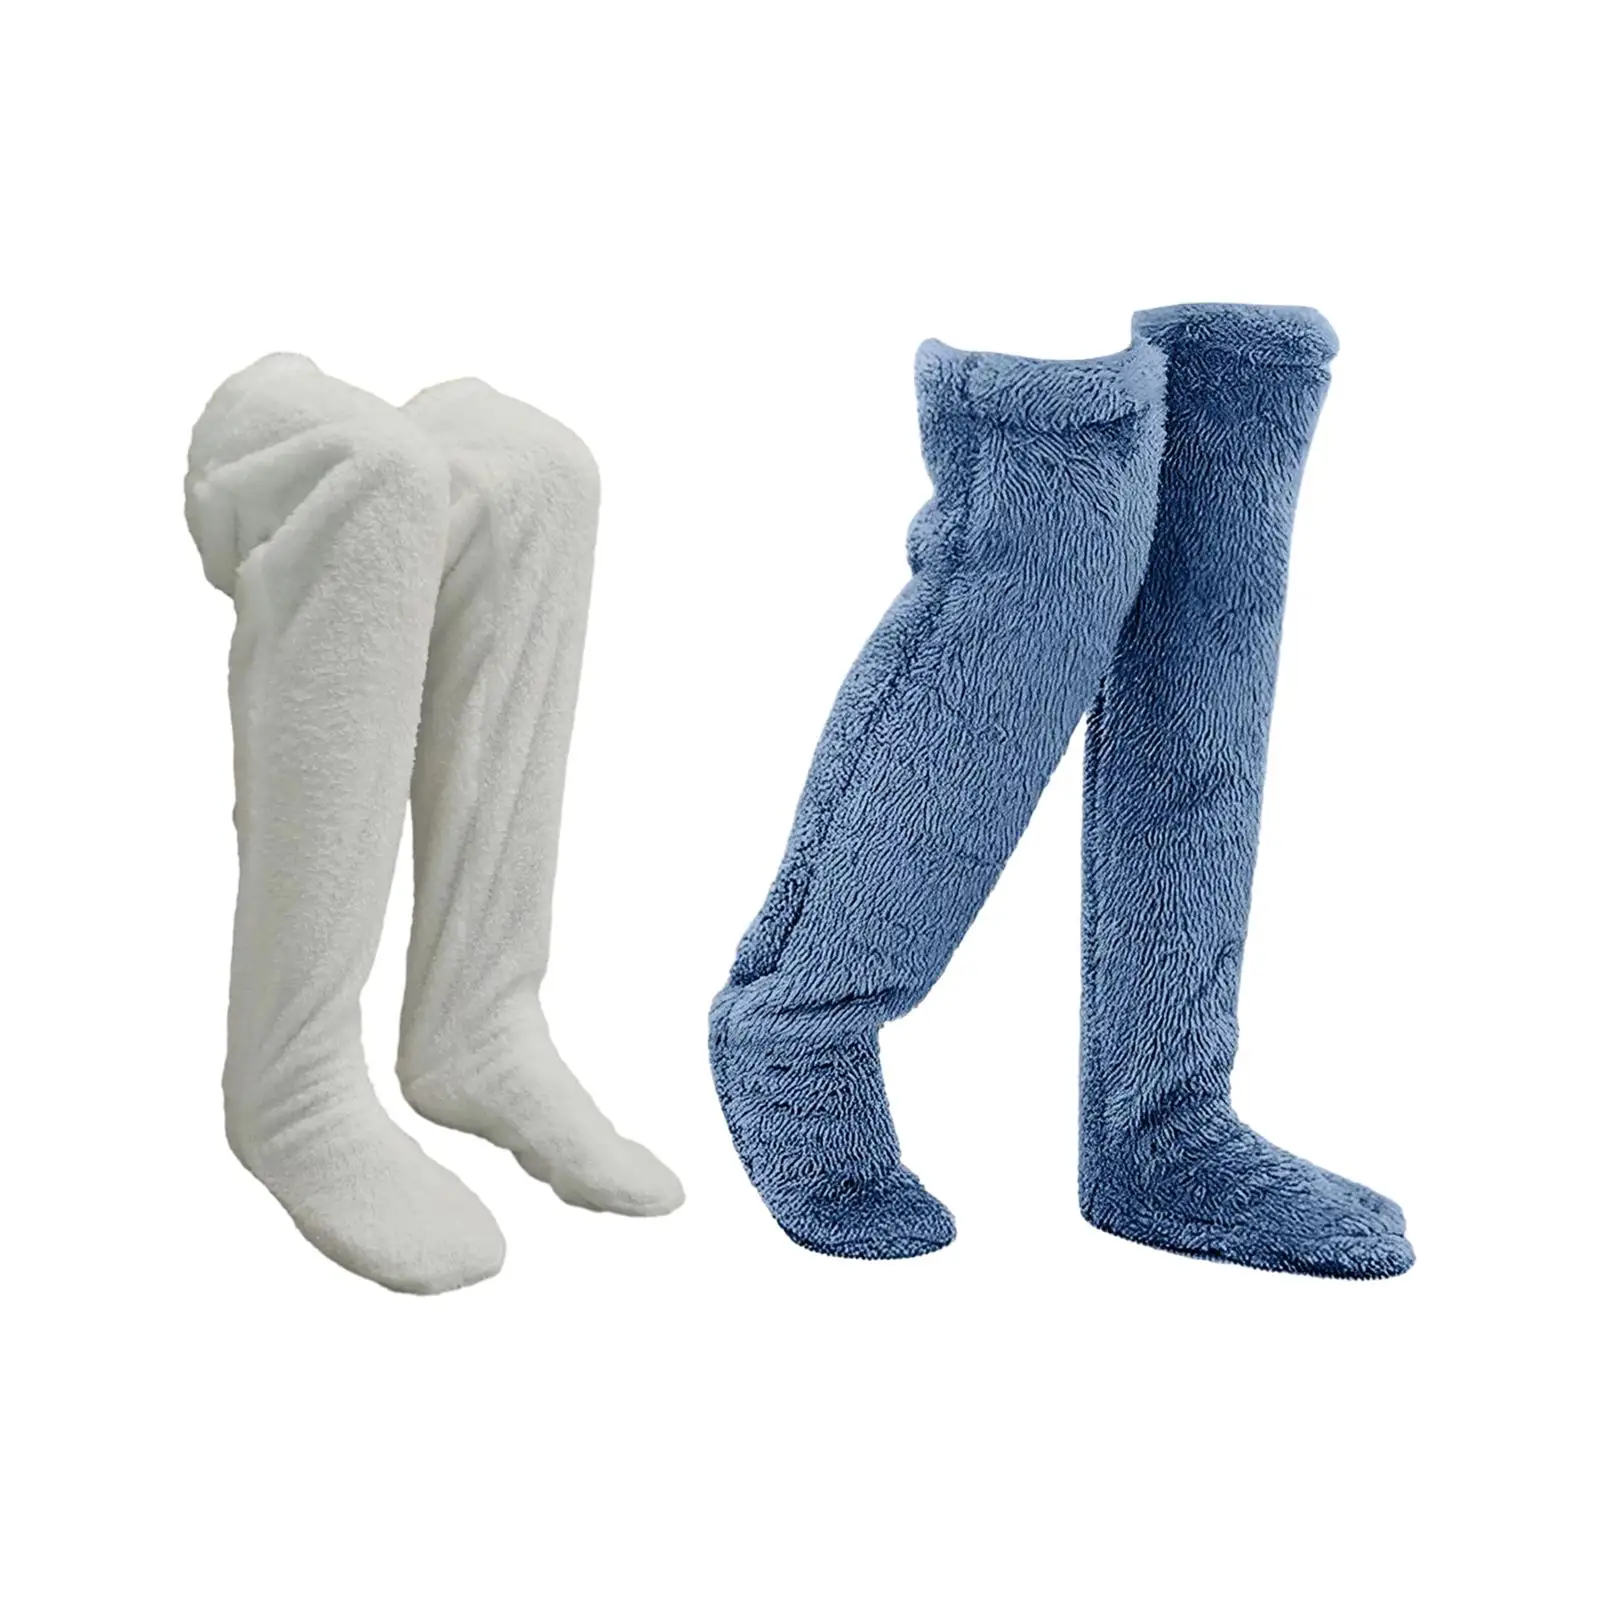 Plush Leg Warmers Long Boot Stockings Protector Knee Warm Thick Soft Costume Thigh High Socks Slipper Stockings for Living Room